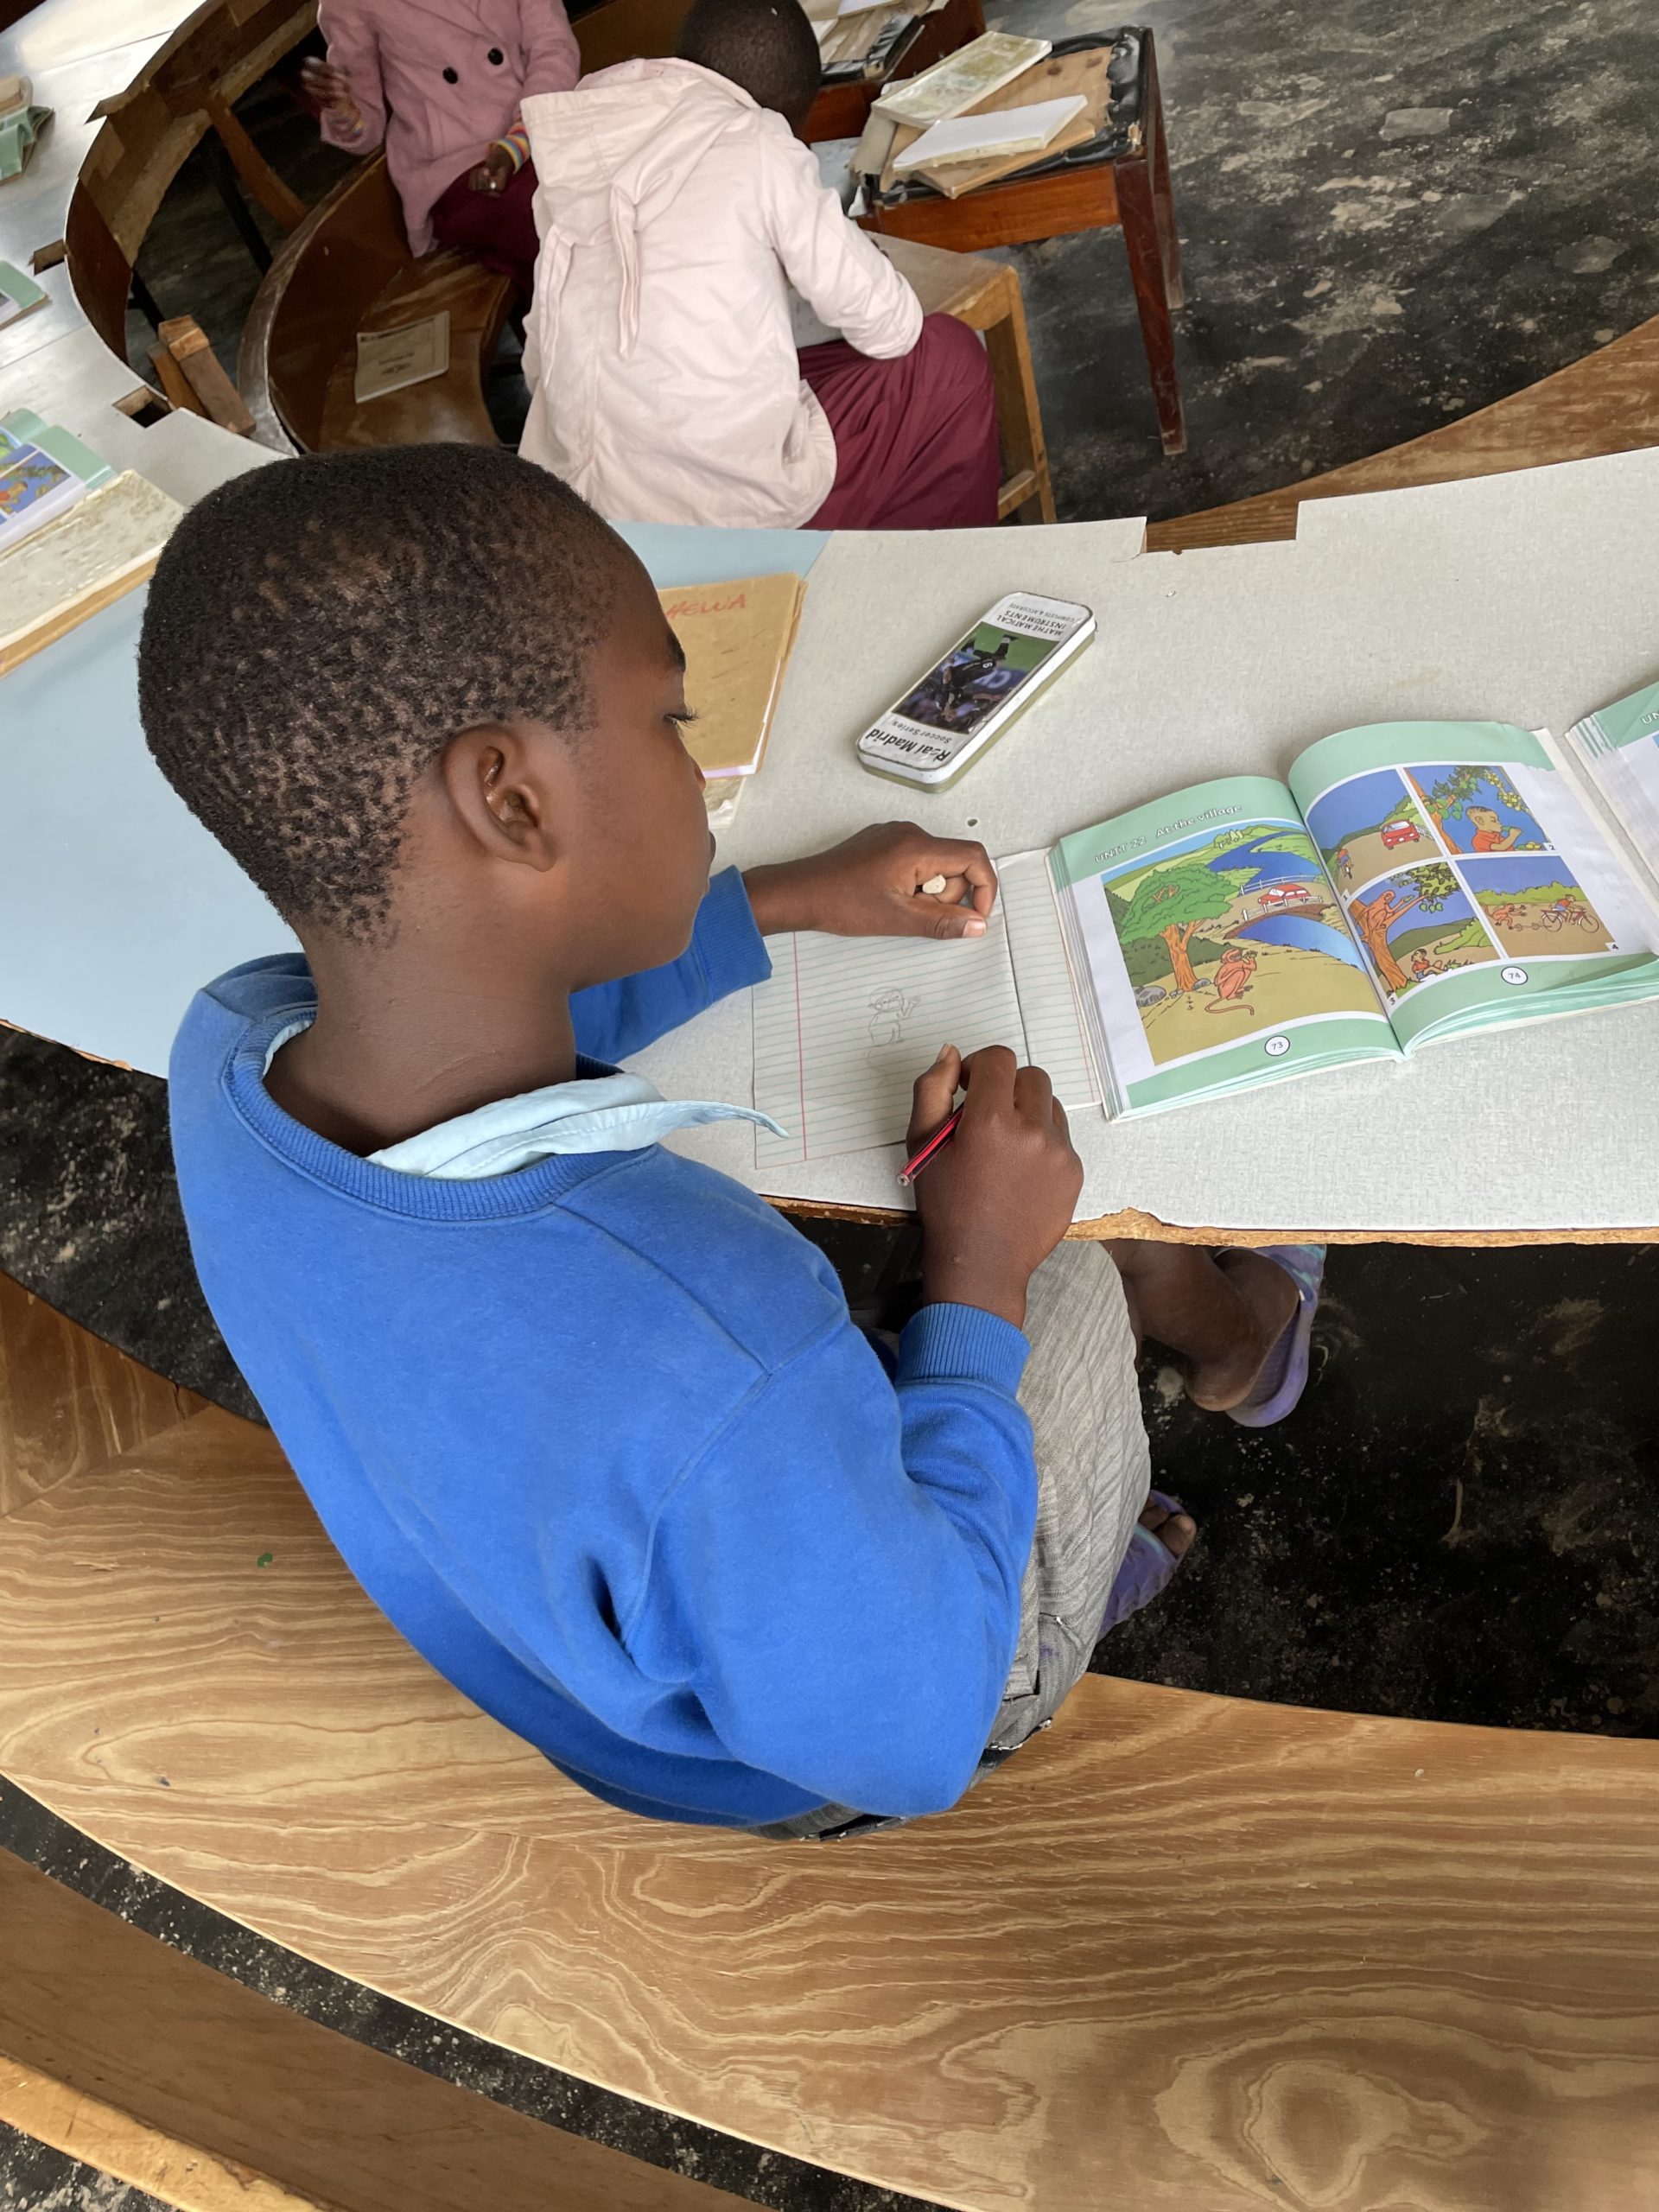 A child sits in a classroom with a book opened to show brightly colored pages. Other learners are seated nearby.